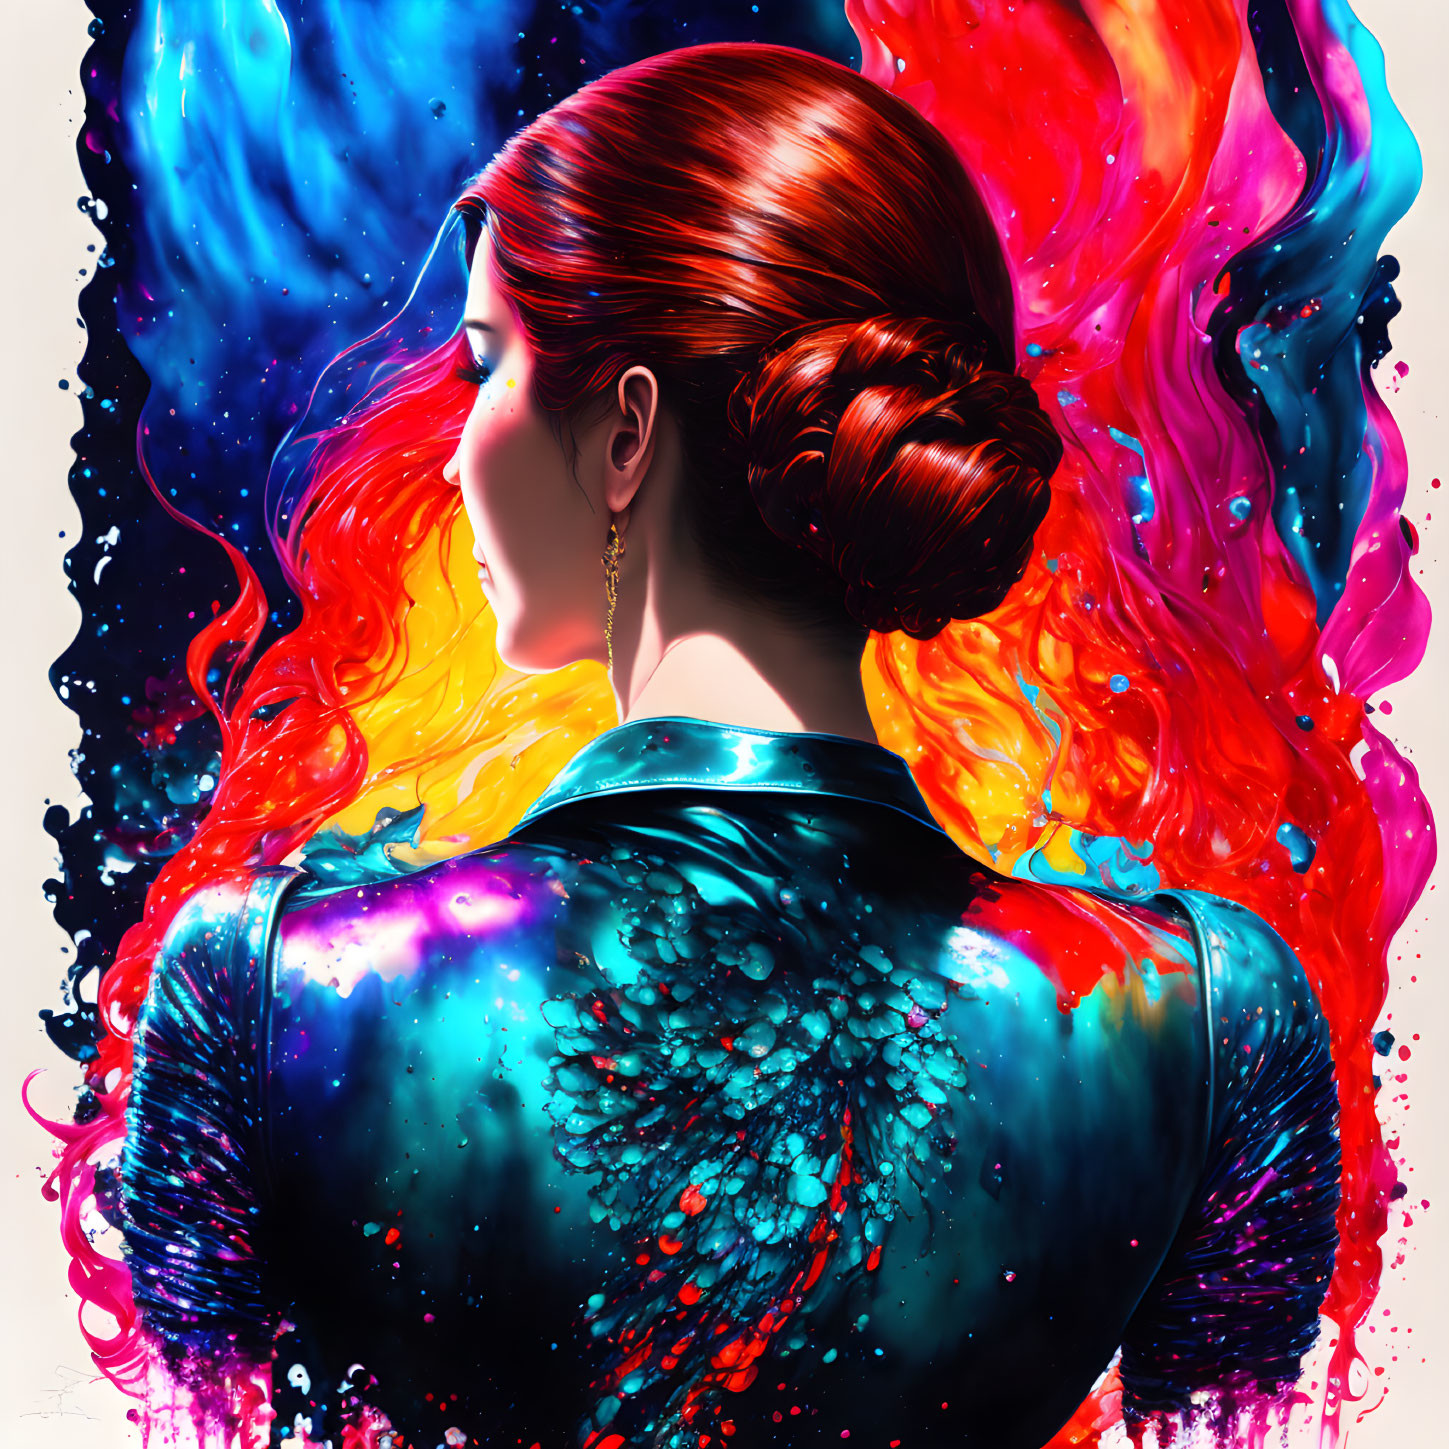 Braided Hair Bun Woman in Galaxy Outfit with Cosmic Colors